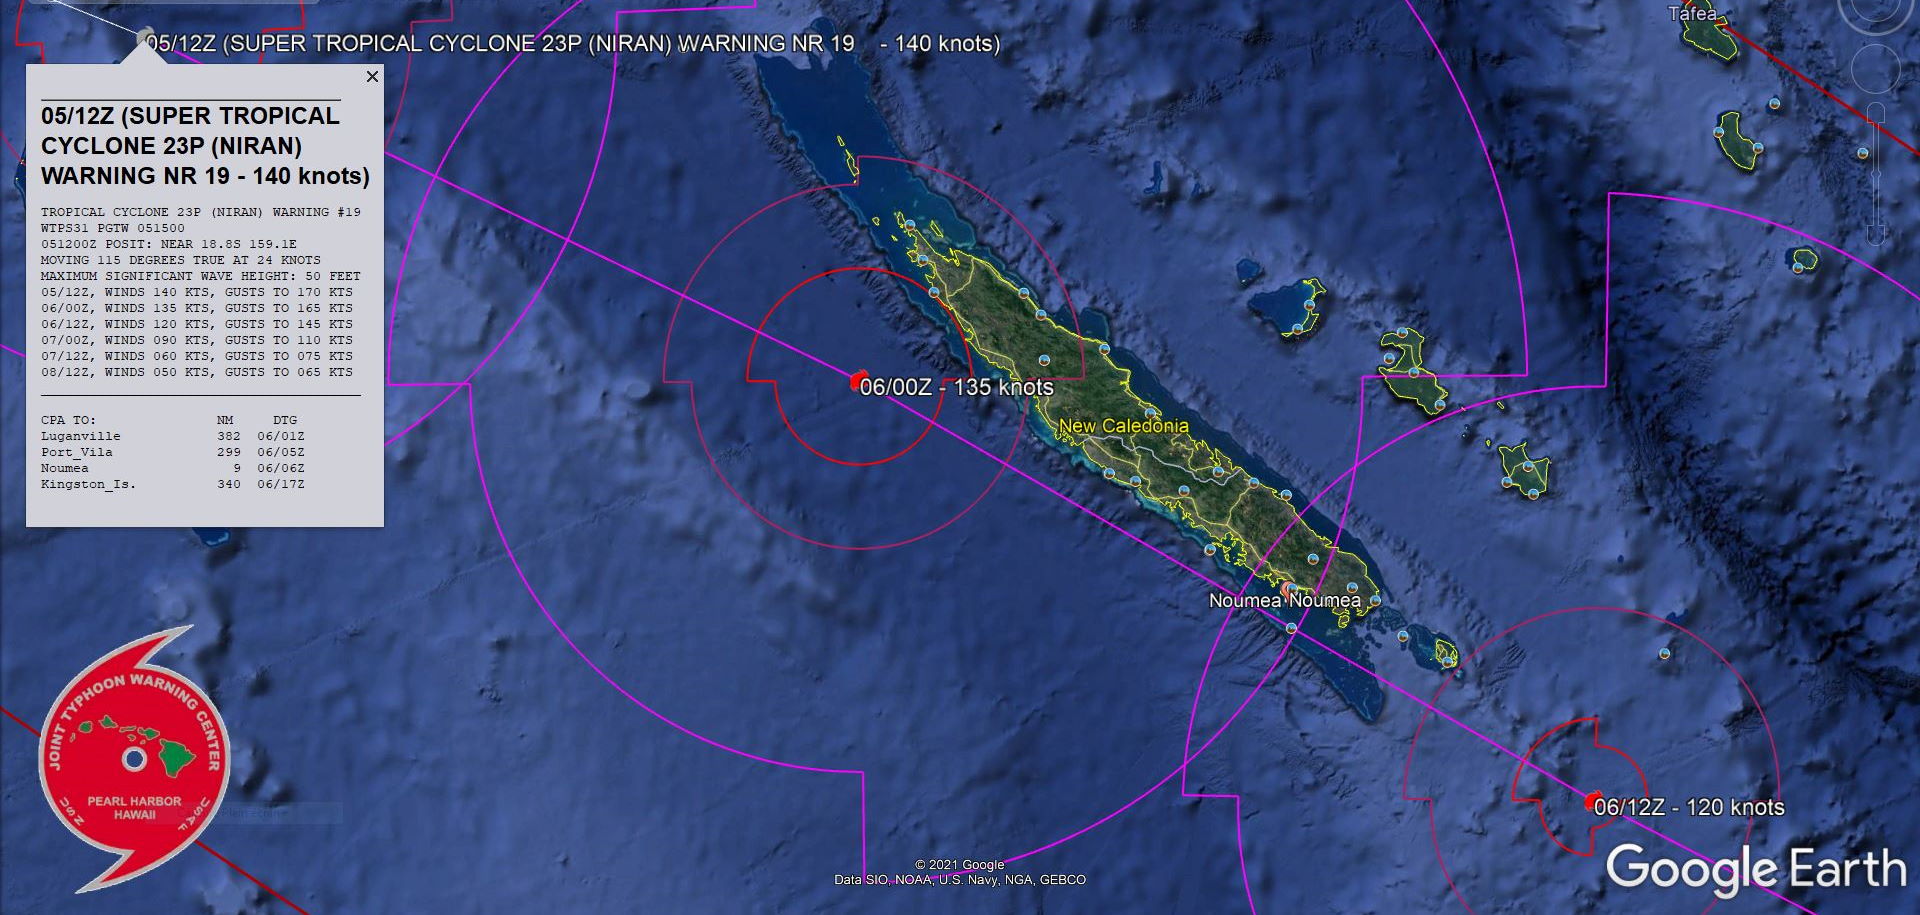 23P(NIRAN). WARNING 19. FORECAST CLOSEST POINT OF APPROACH TO NOUMEA IS 17KM BY 06/06UTC.